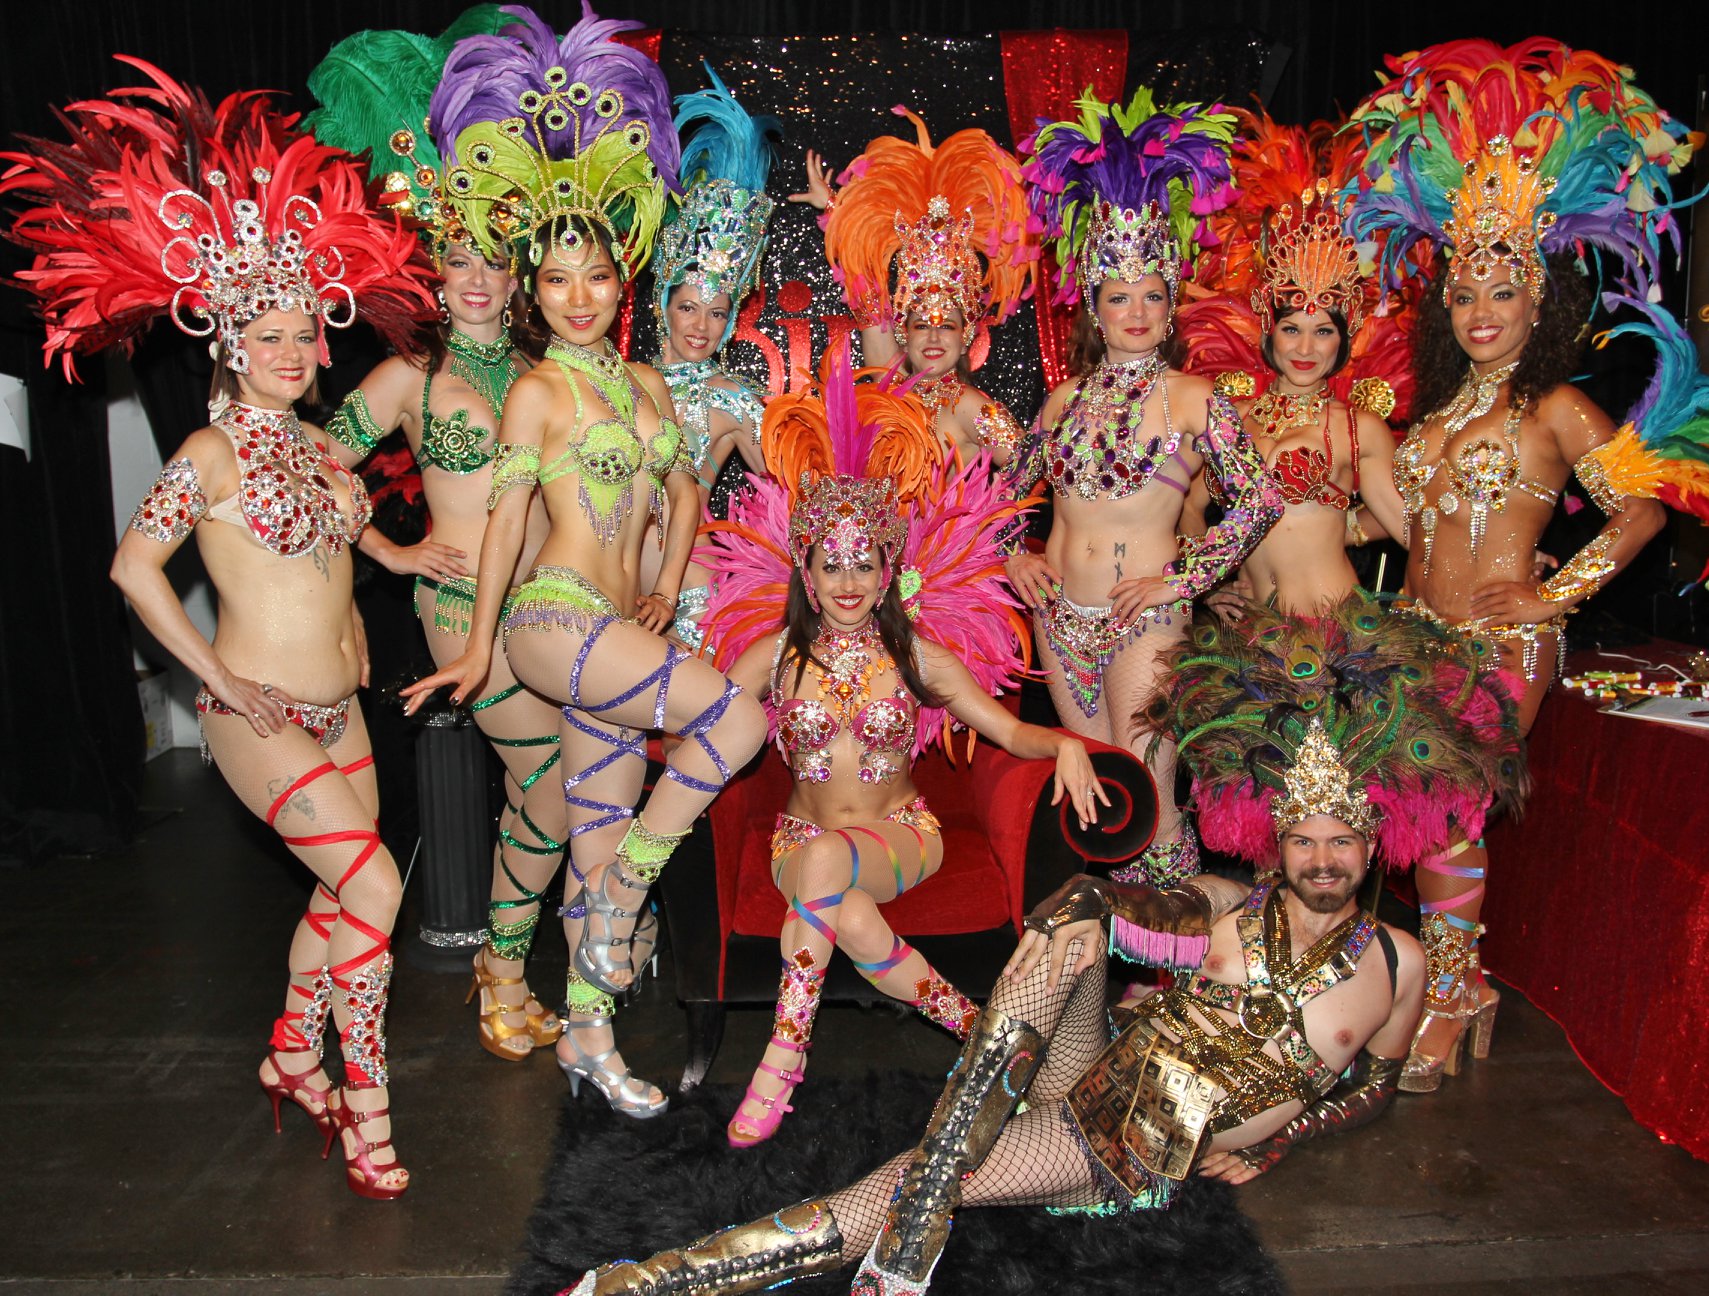 Ring in the New Year with Samba in the City